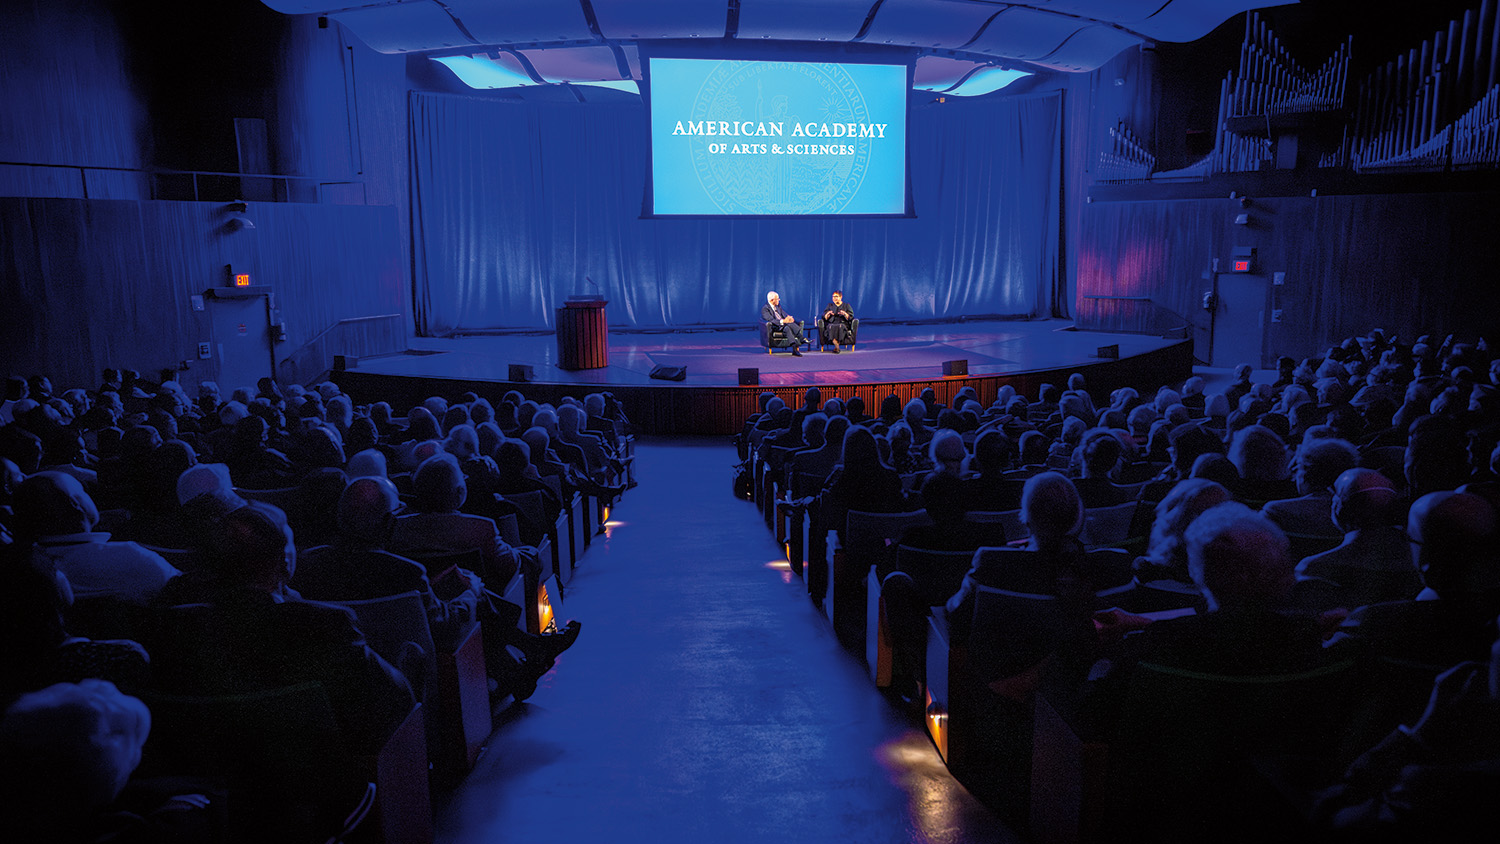 A large audience watches two people talk on a stage. The audience is in the dark. The people sit in large chairs on the stage. They are bathed in blue lights and surrounded by blue curtains. Behind them, a projection screen reads American Academy of Arts and Sciences.